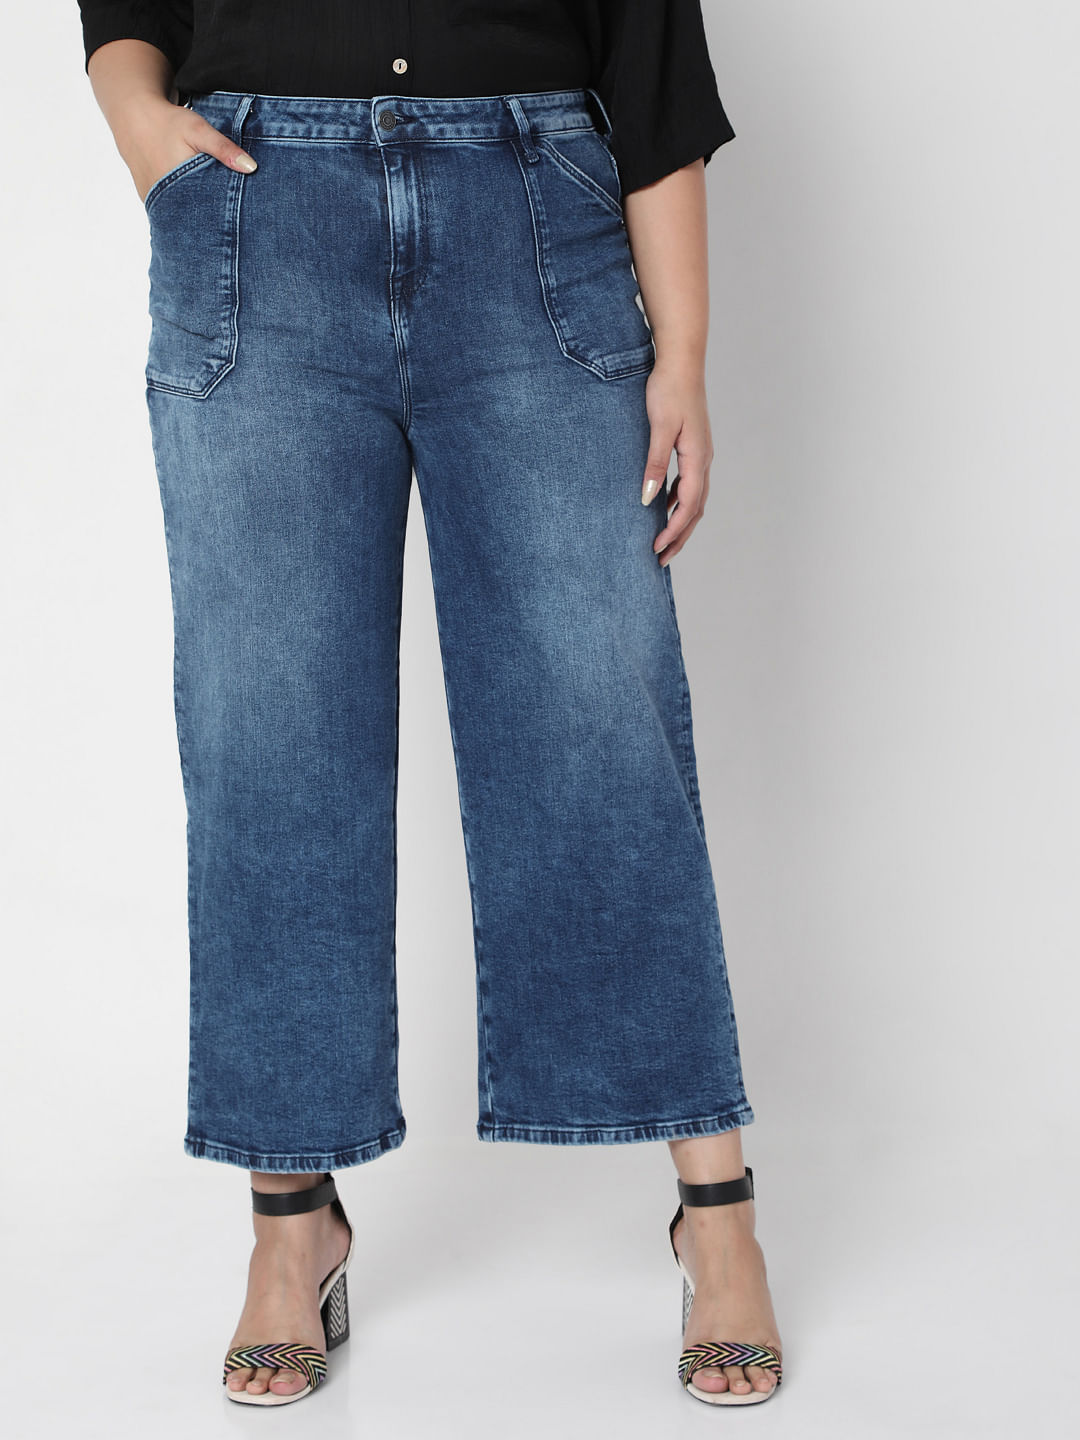 Shop Wide Leg Jeans At Glassons | Discover Our Collection